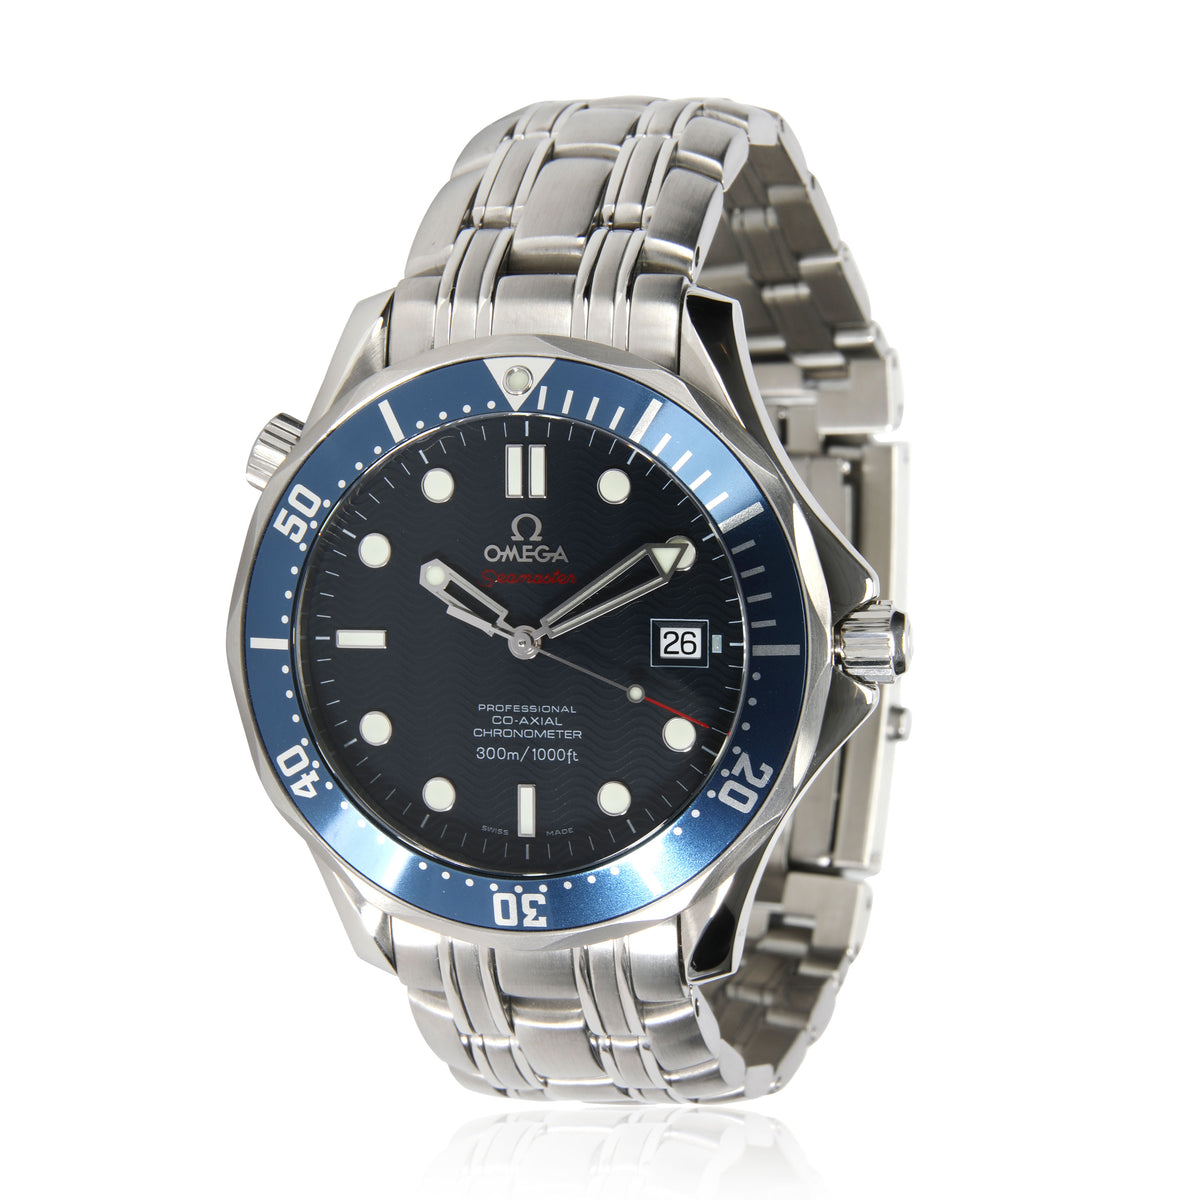 Omega Seamaster Professional 2220.80.00 Men's Watch in  Stainless Steel